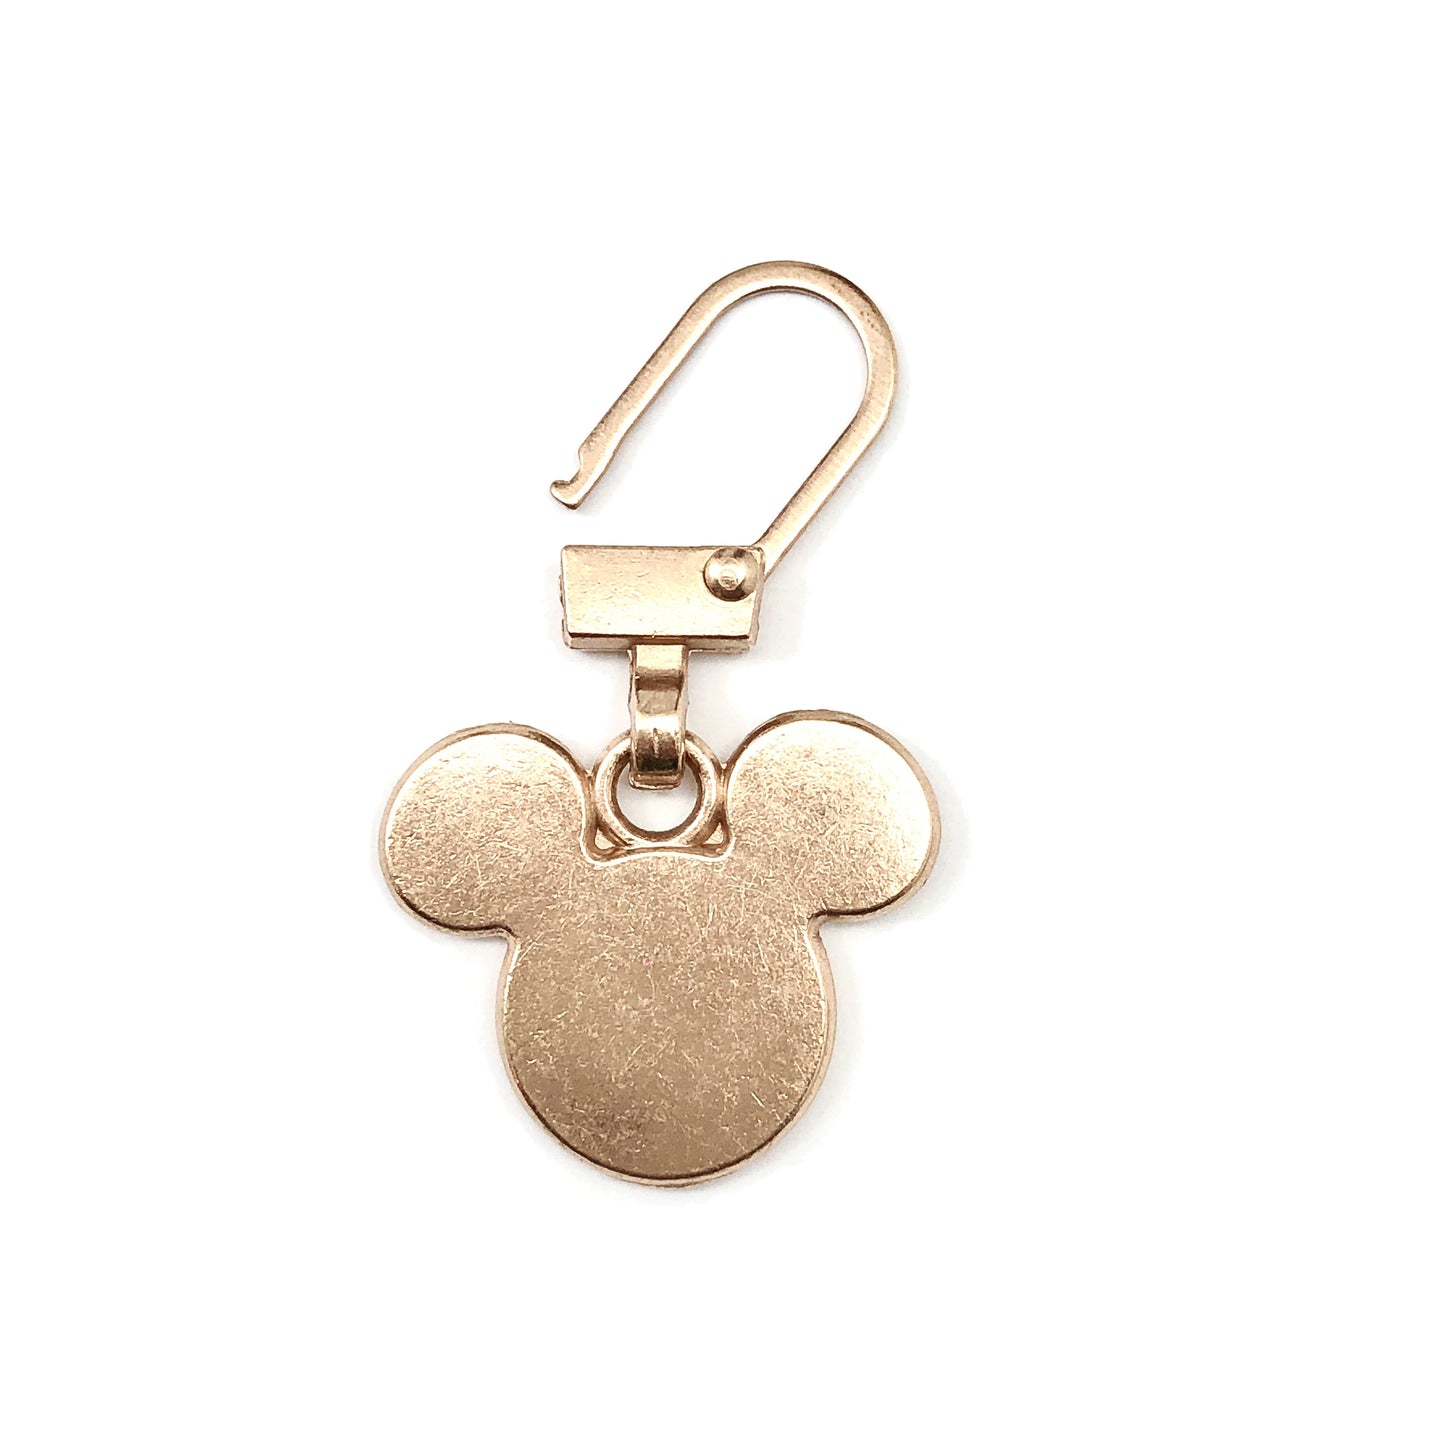 Mickey Mouse Silhouette Charm - Rustic Gold,  Zipper Pull Charm for Repair or Decorative Shoe, Purse Charm & More | Travel Accessories